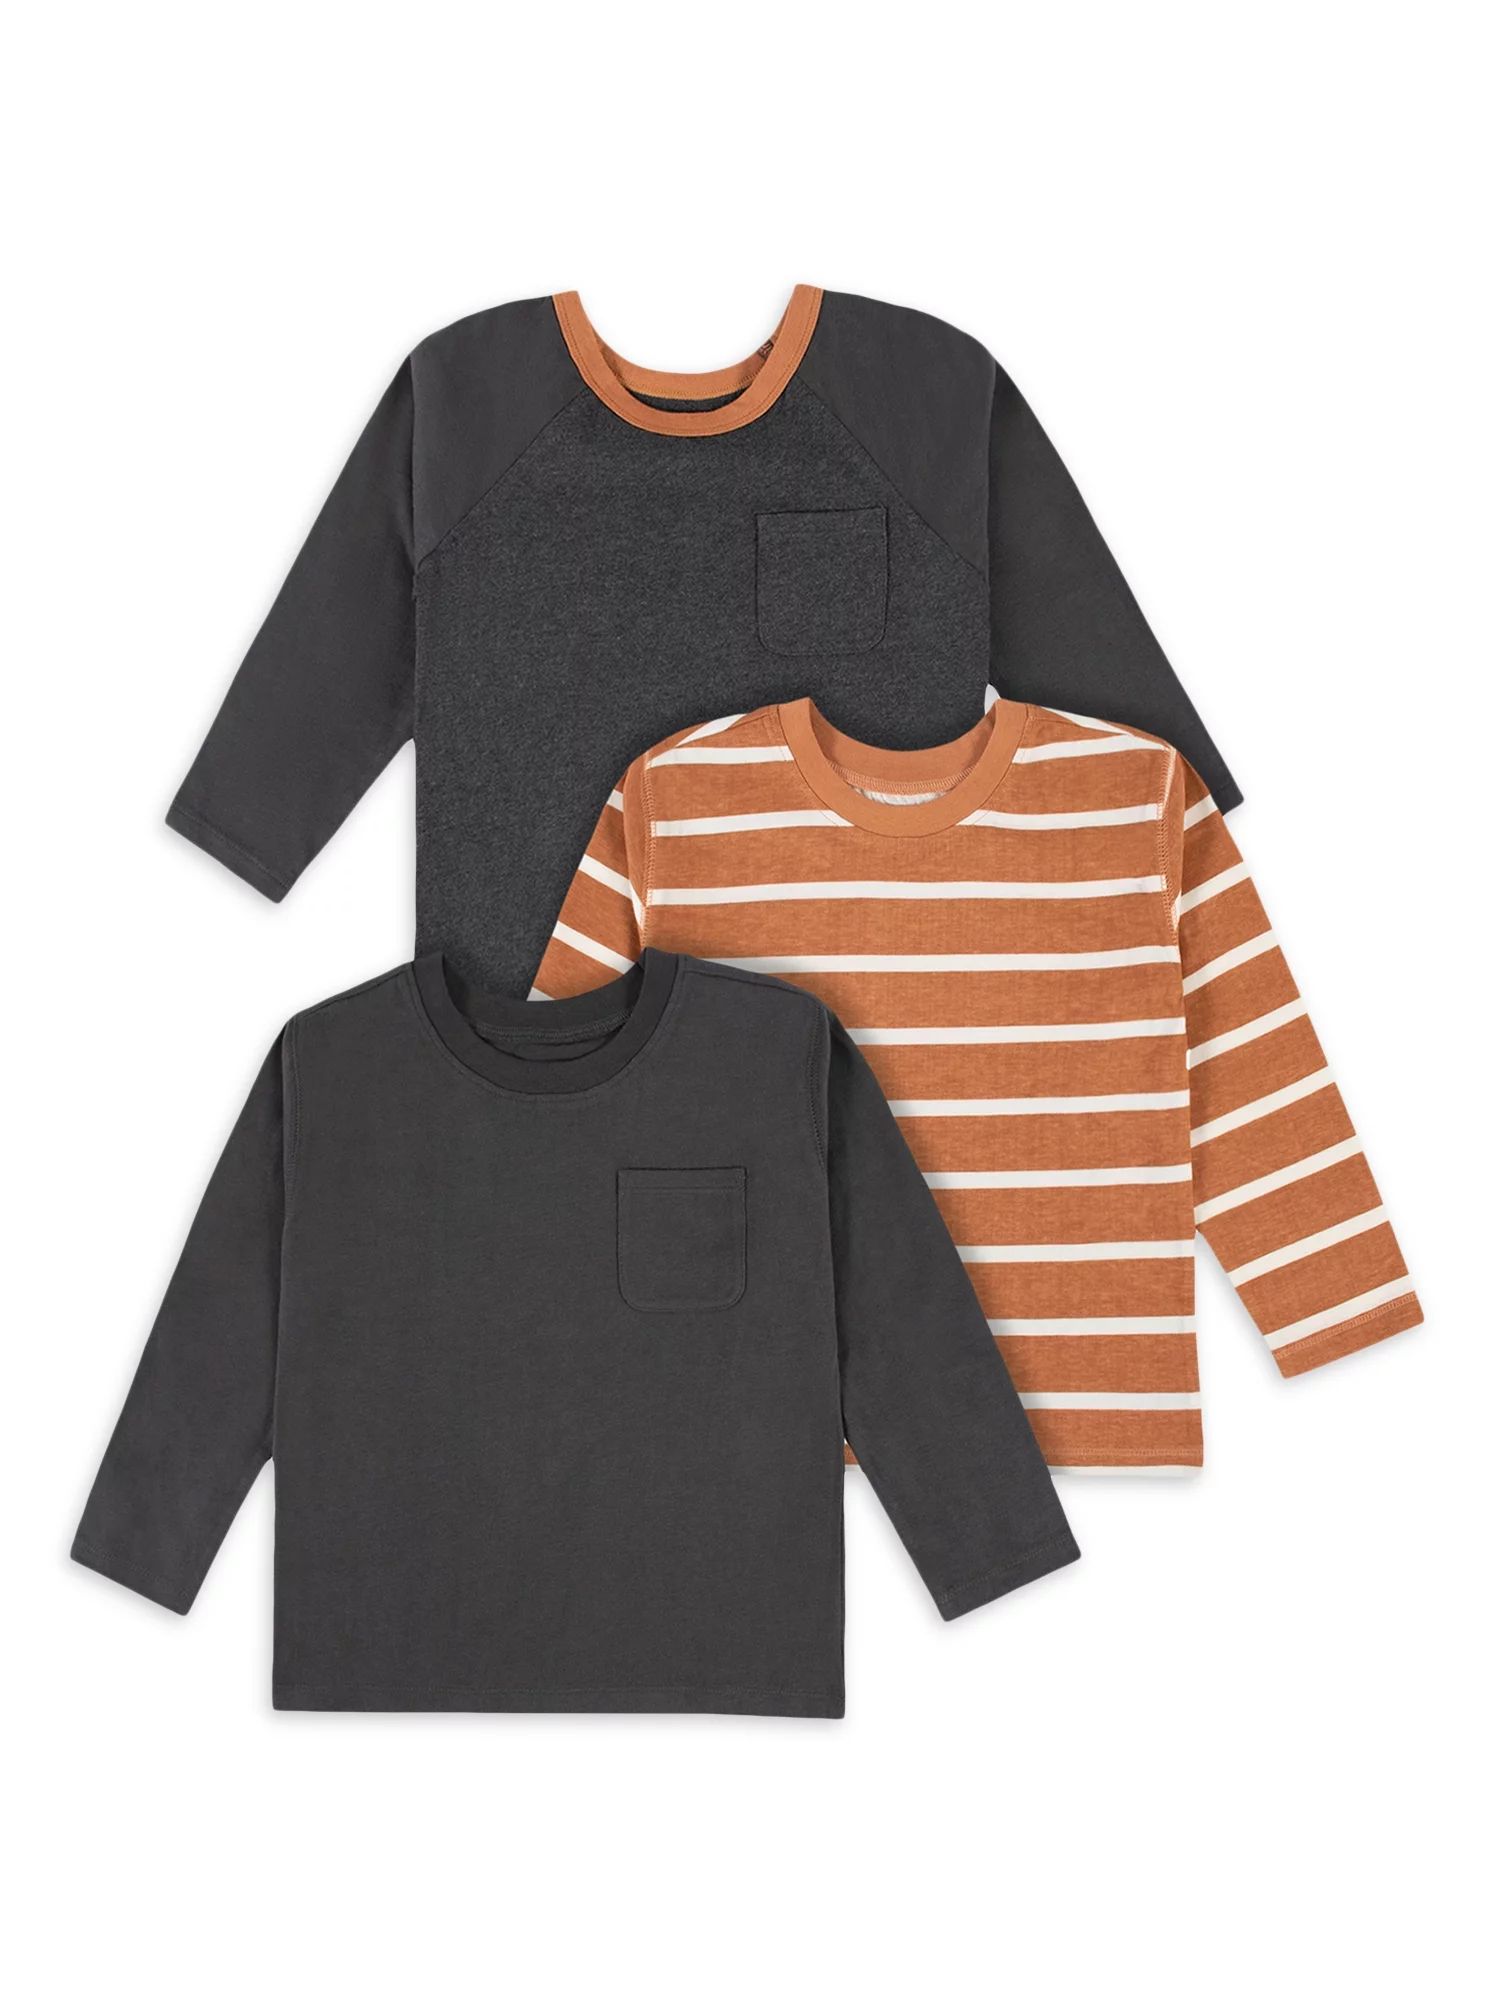 Modern Moments by Gerber Baby and Toddler Boy Long-Sleeve T-Shirts, 3-Pack, Sizes 12M-5T - Walmar... | Walmart (US)